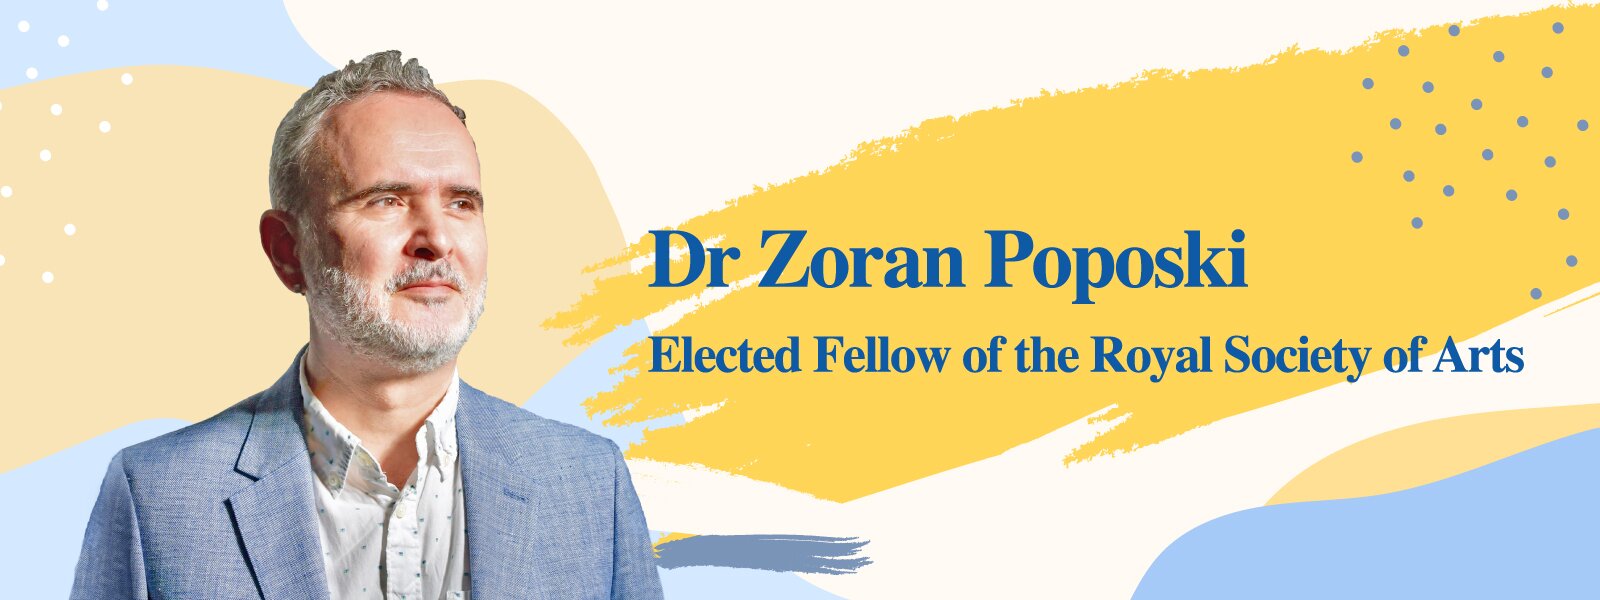 Dr Zoran Poposki Elected Fellow of the Royal Society of Arts